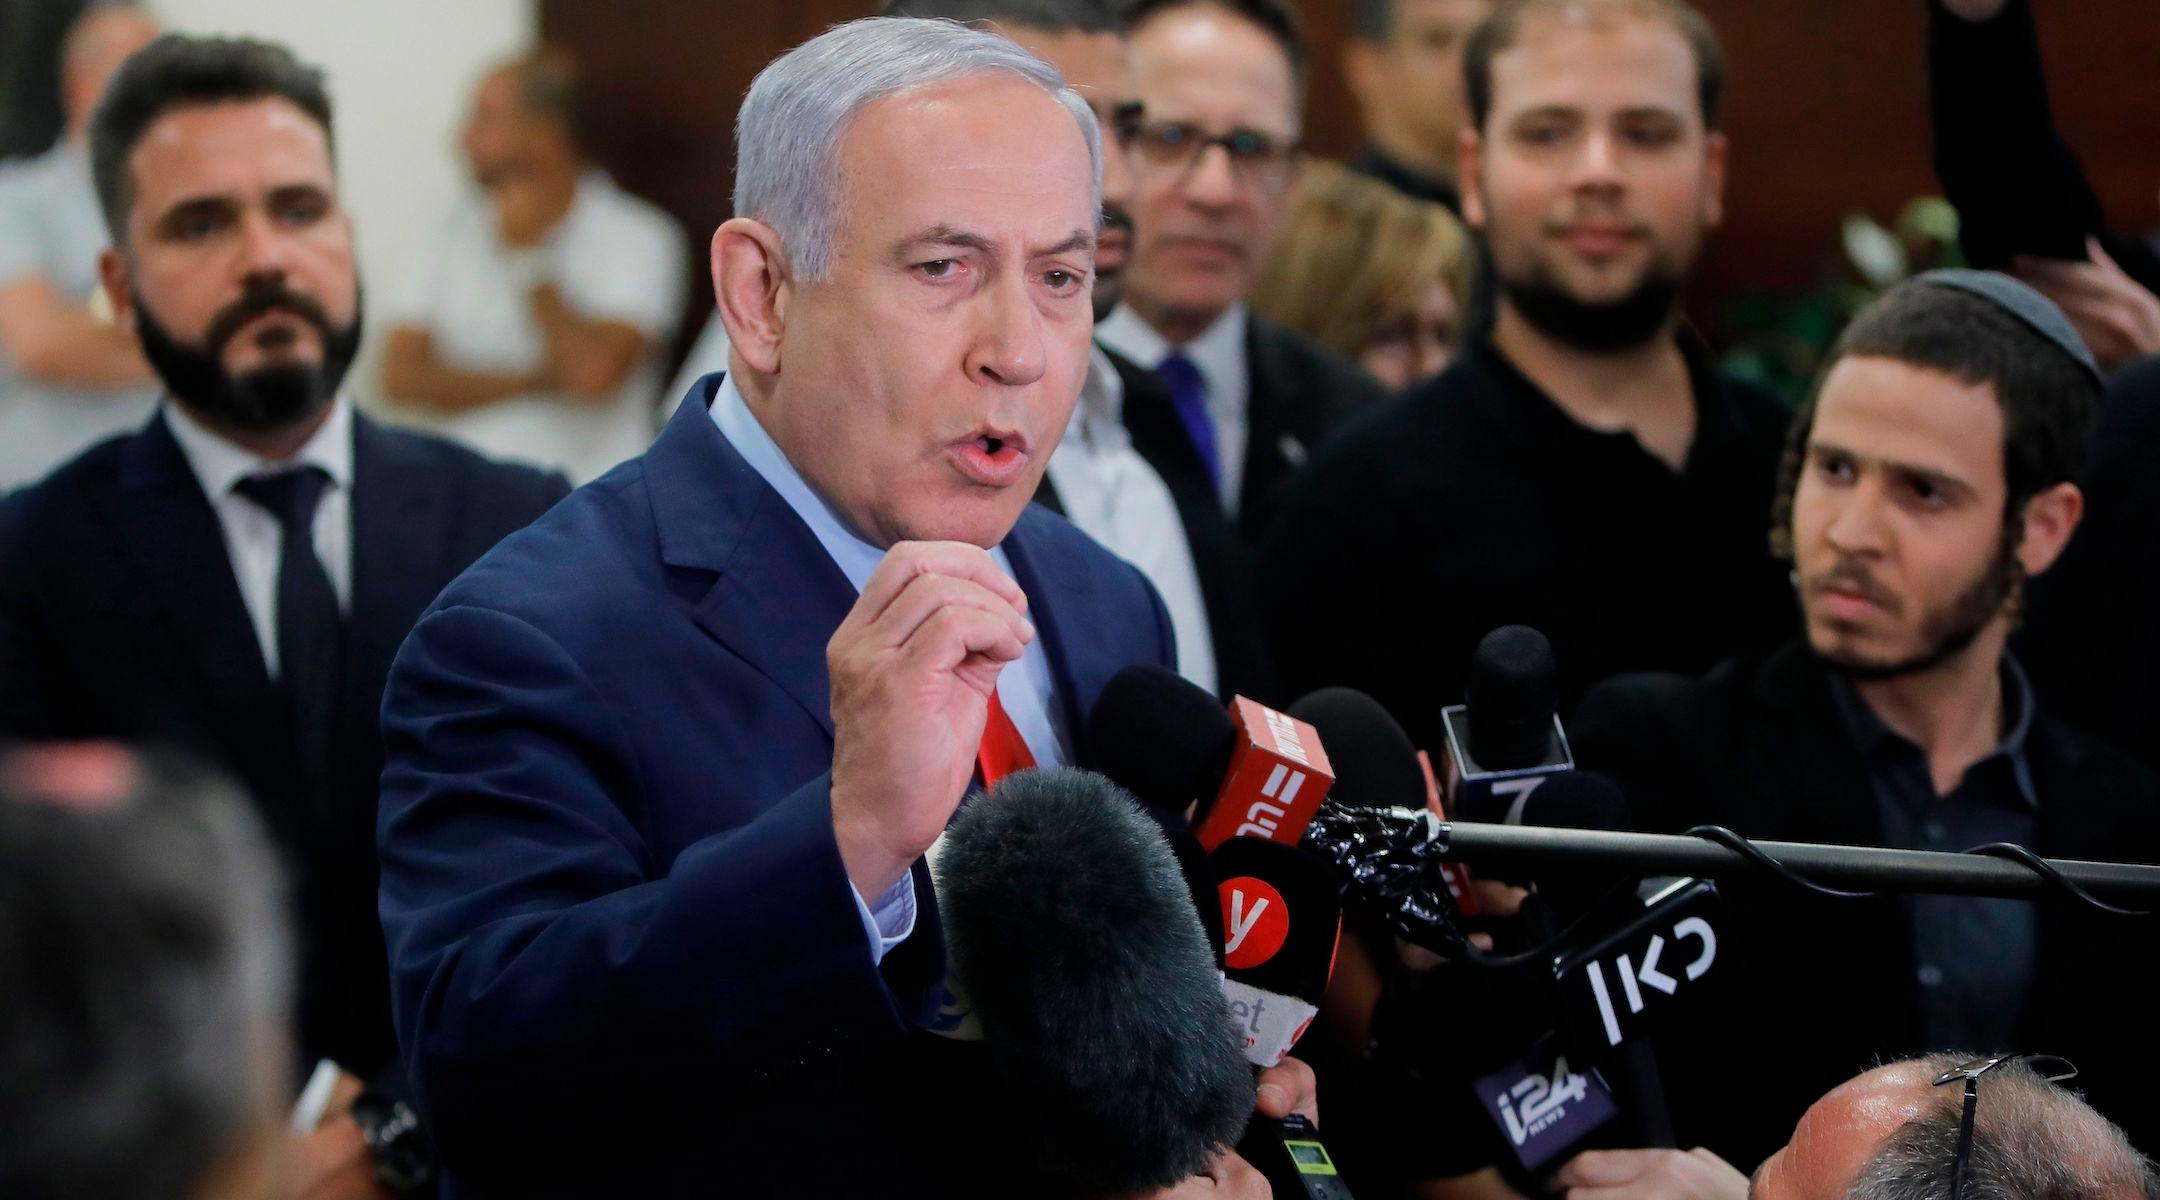 Israeli Prime Minister Benjamin Netanyahu talks to the press following a vote on a bill to dissolve the Israeli parliament in Jerusalem, May 29, 2019. (Menahem Kahana/AFP/Getty Images)